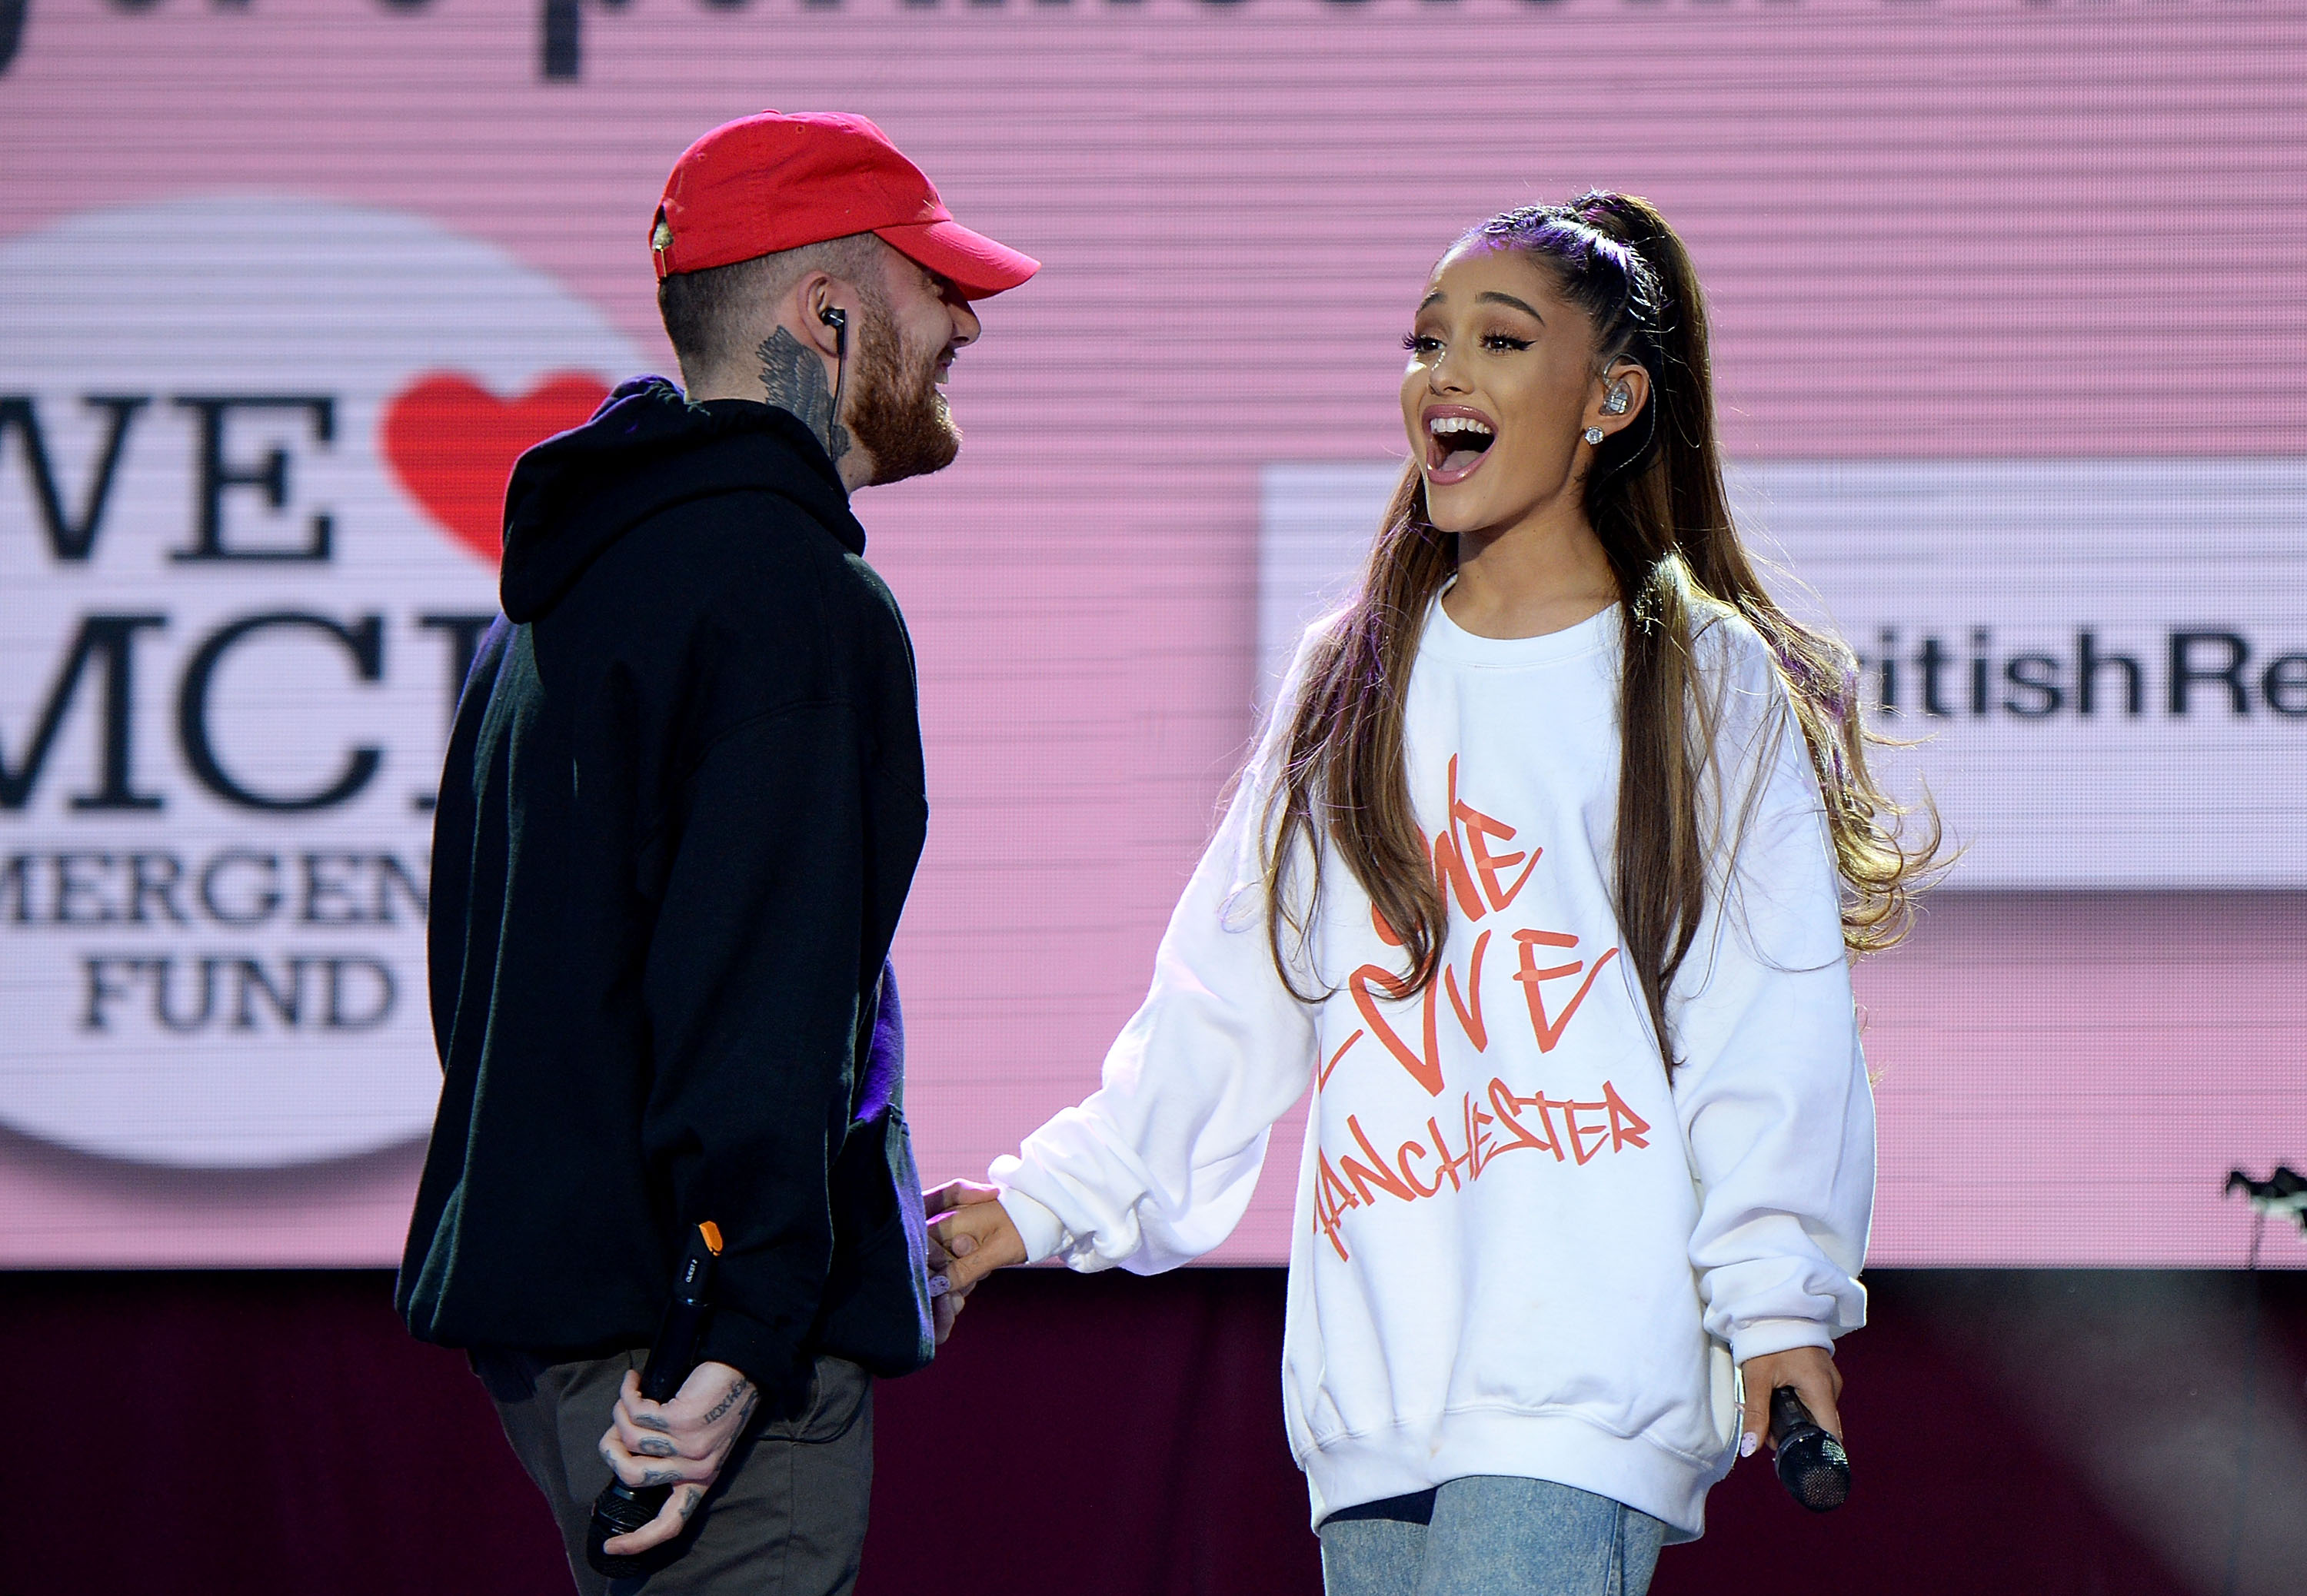 Mac Miller and Ariana Grande perform on stage during the One Love Manchester Benefit Concert at Old Trafford Cricket Ground on June 4, 2017 in Manchester, England | Source: Getty Images